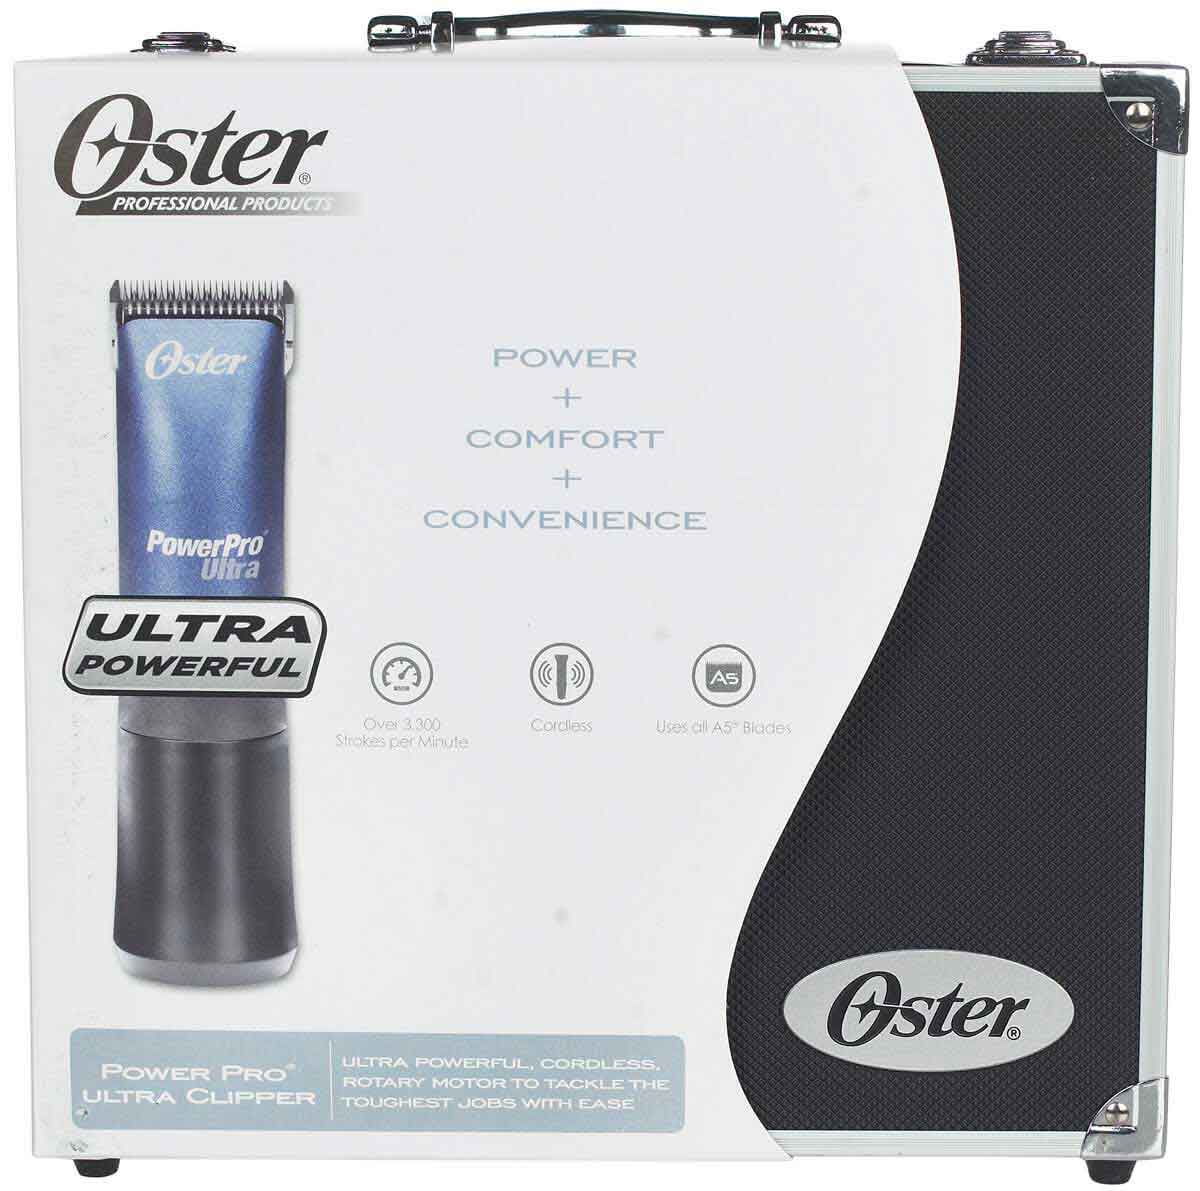 oster power pro cordless clippers